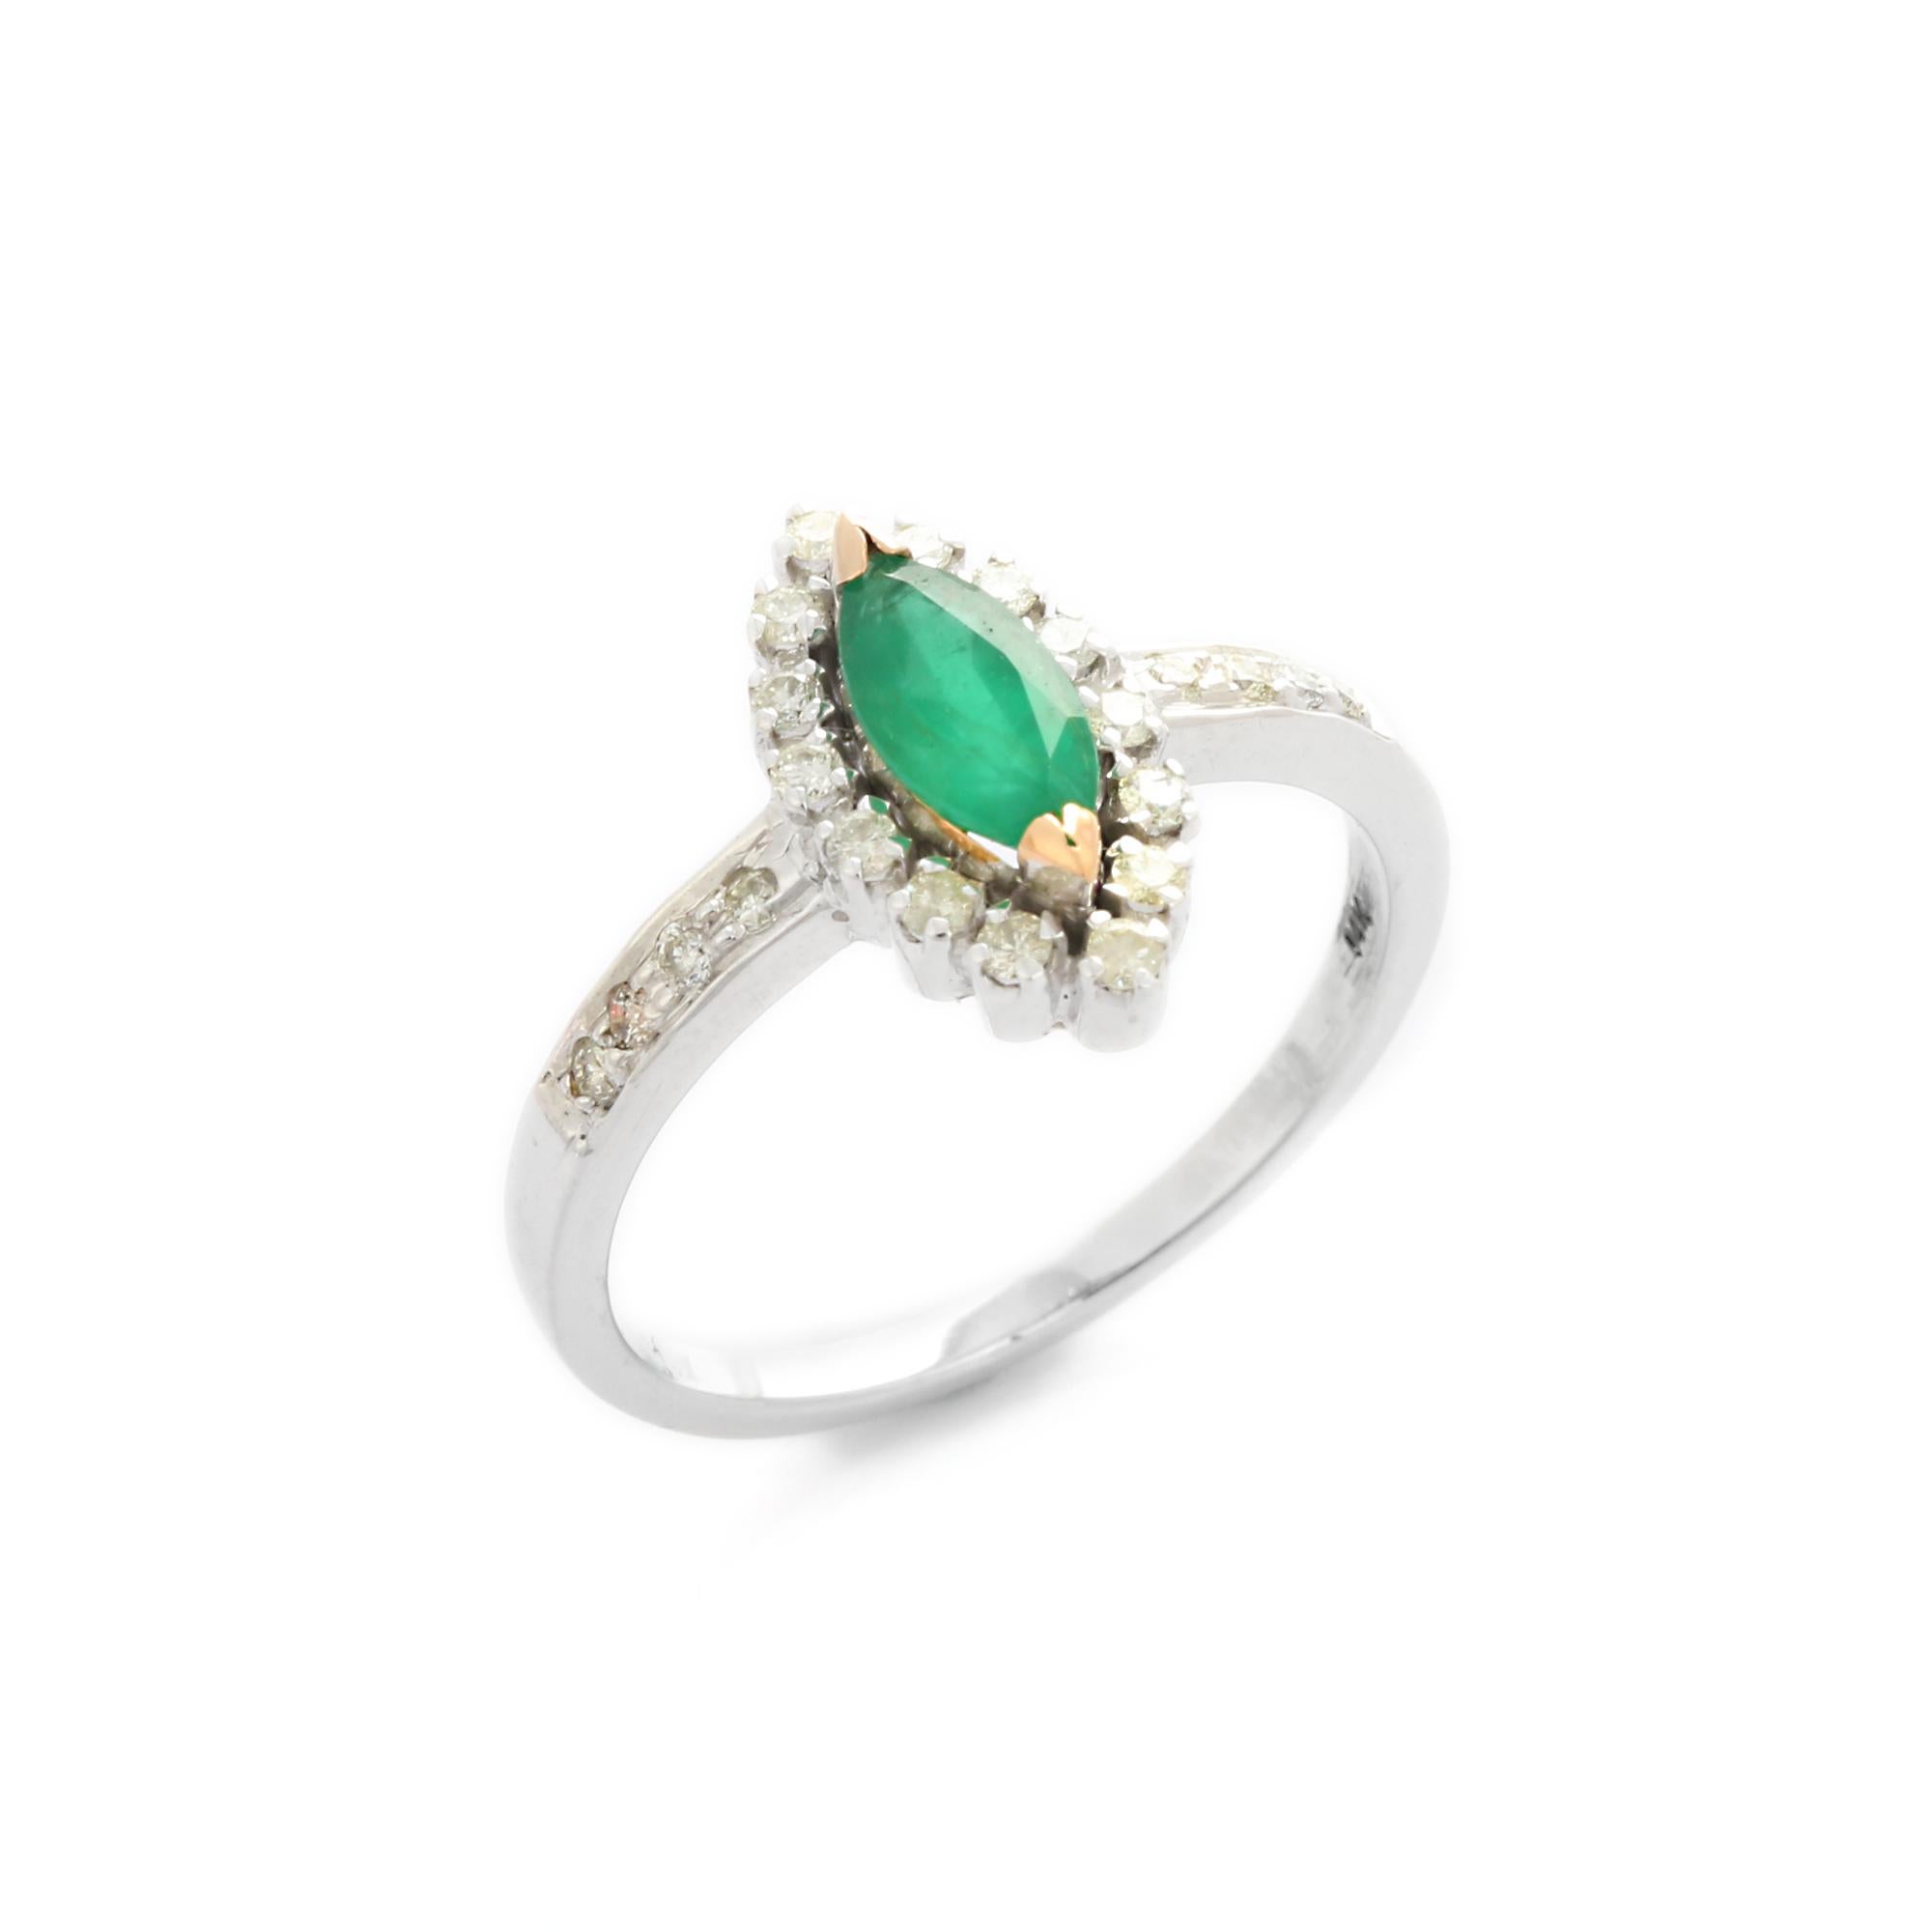 For Sale:  Marquise Shaped Emerald and Diamond Ring in 14K White Gold 11